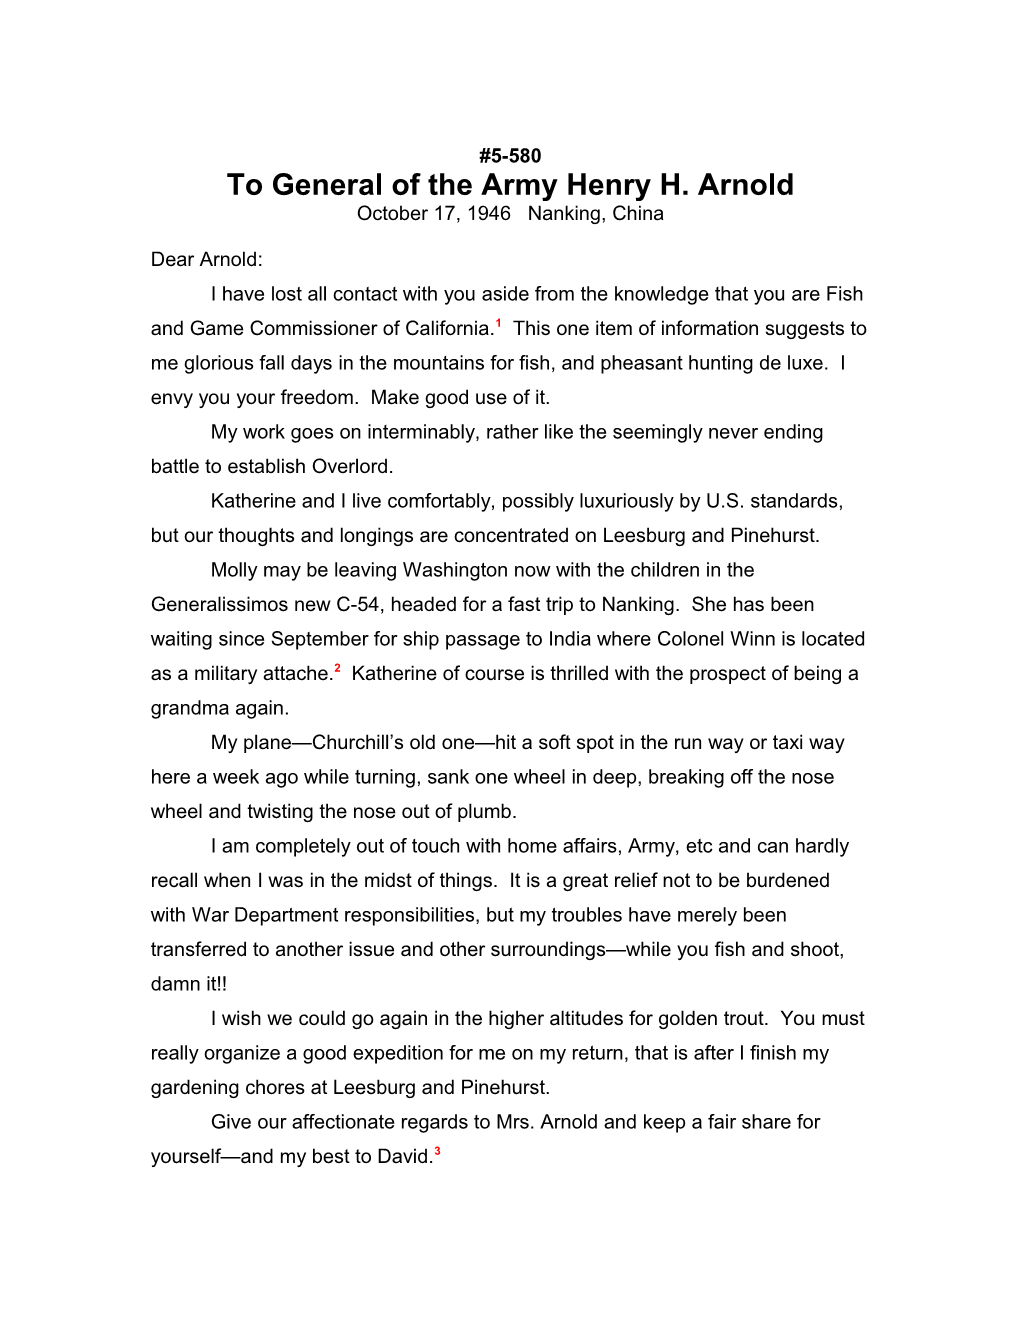 To General of the Army Henry H. Arnold s1